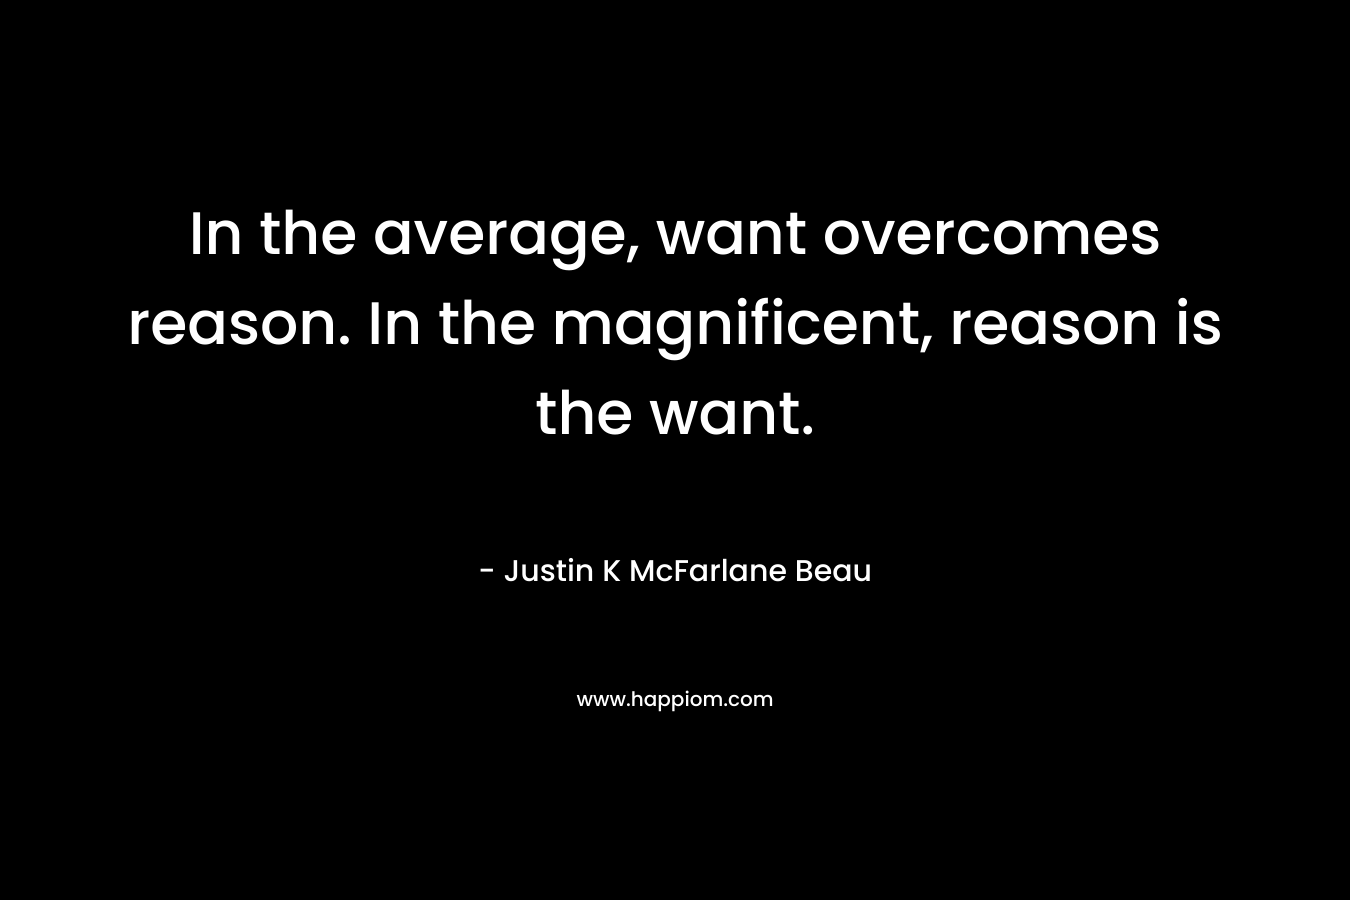 In the average, want overcomes reason. In the magnificent, reason is the want.